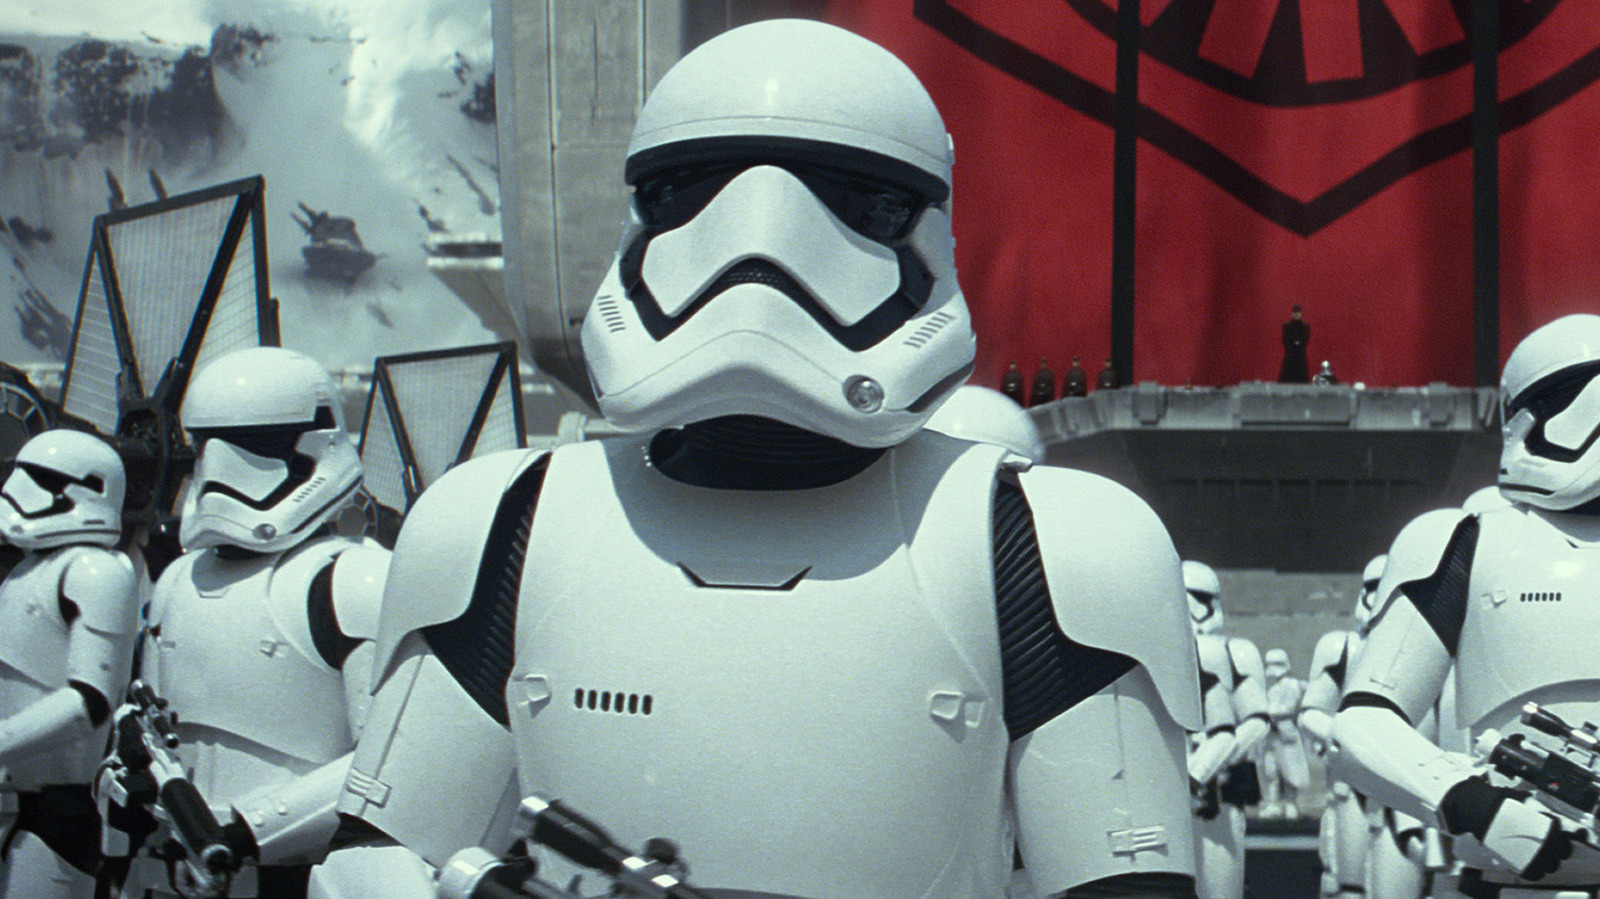 https://www.looper.com/img/gallery/every-type-of-stormtrooper-explained/l-intro-1609870616.jpg